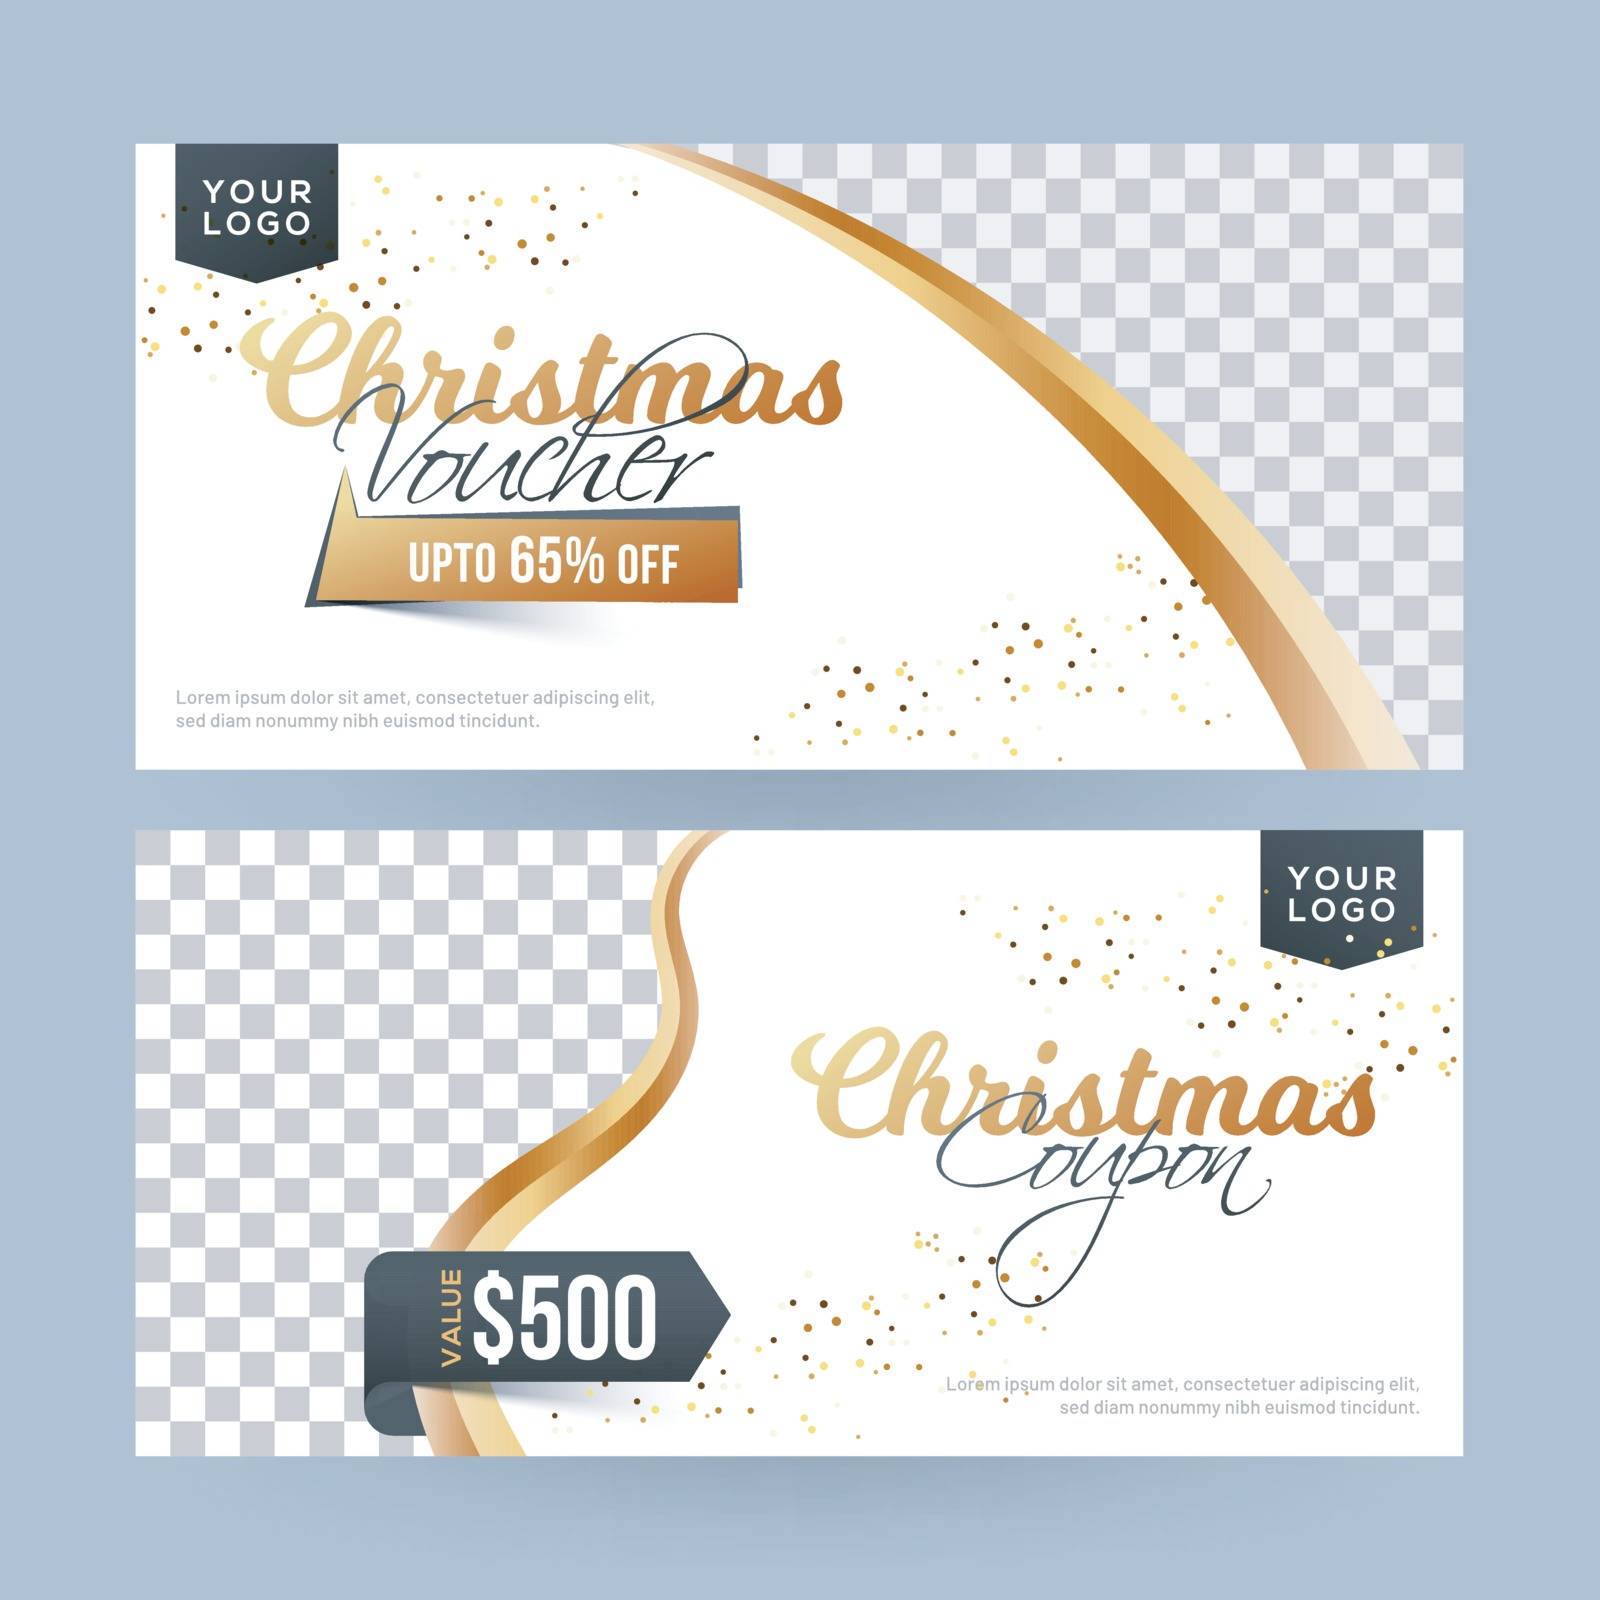 Christmas voucher or coupon layout with different discount value and space for your product image.